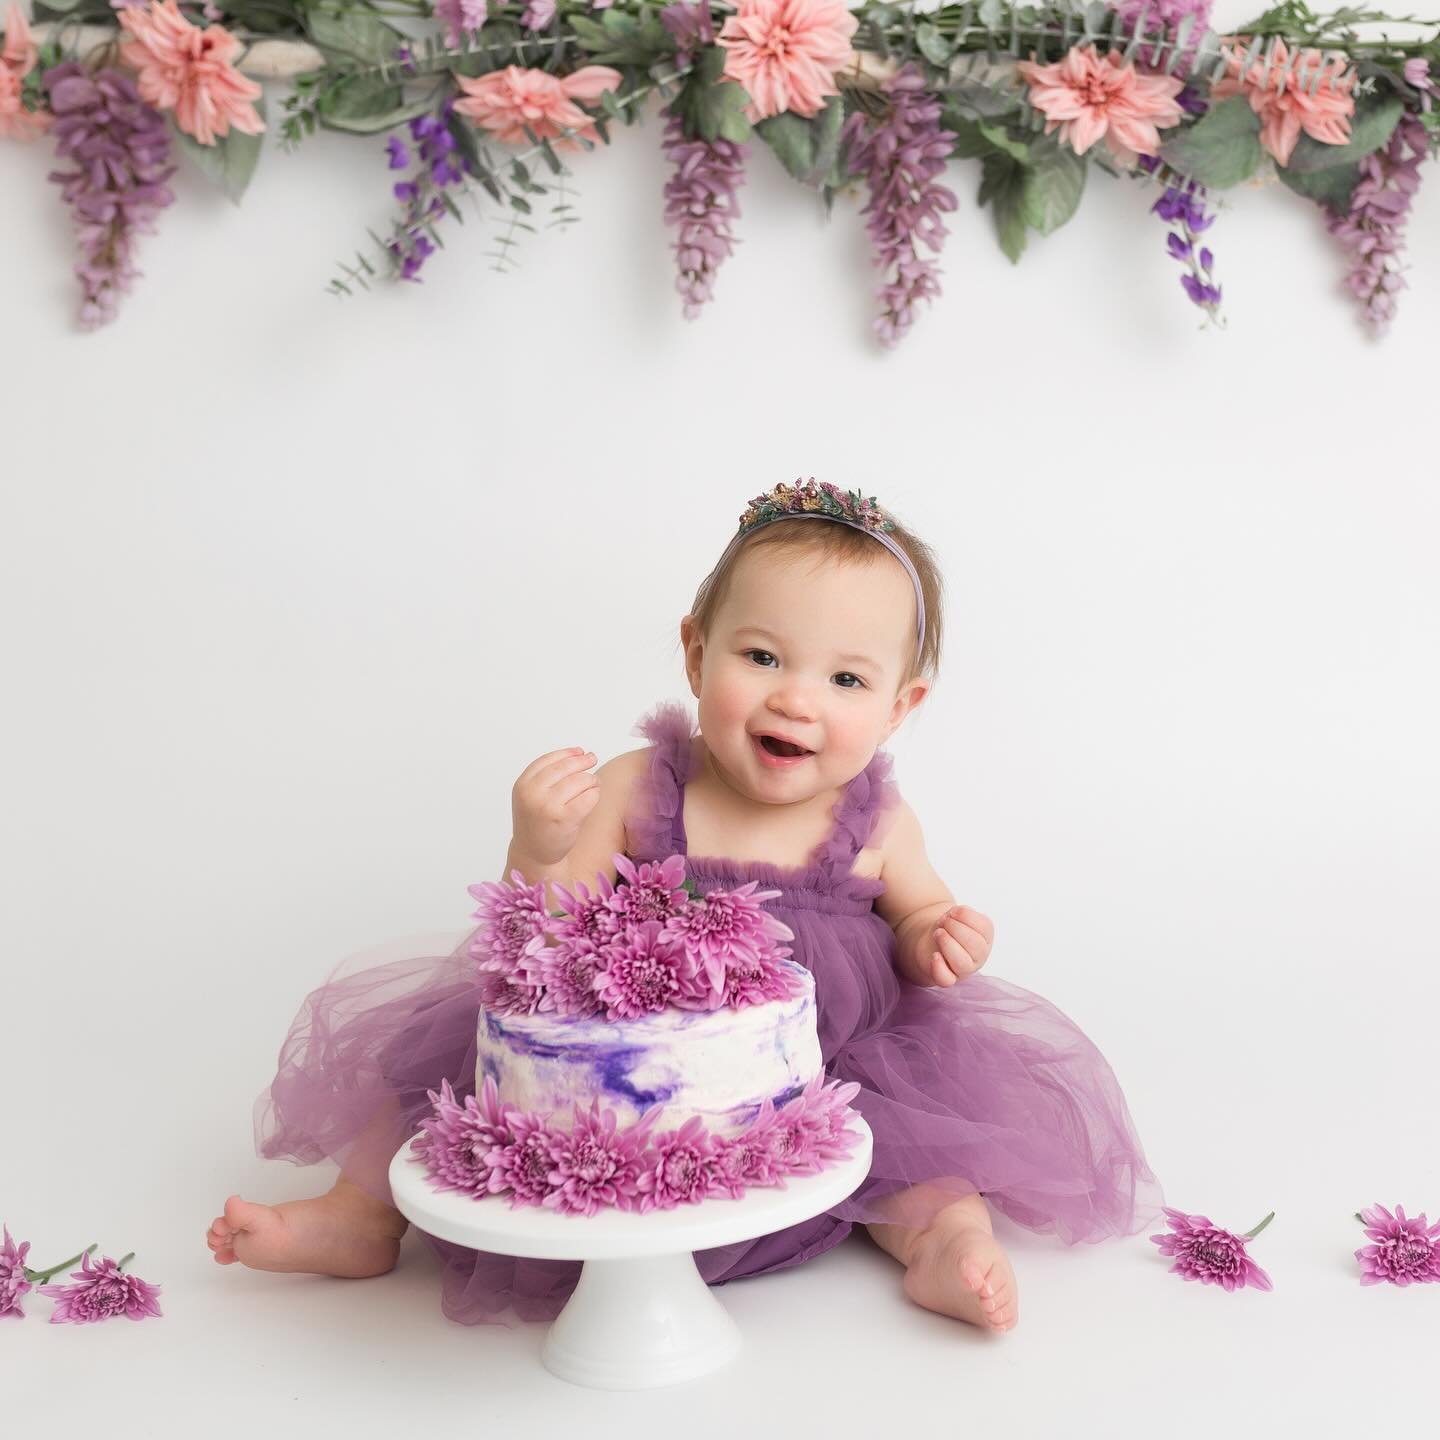 This sweet girl turned one! So lucky I got to see her back at the studio again for her cake smash. We used fresh flowers, a delicious cake to match, plus this adorable tutu outfit to complete the Spring look. Happy first birthday gorgeous girl! 💖💜?